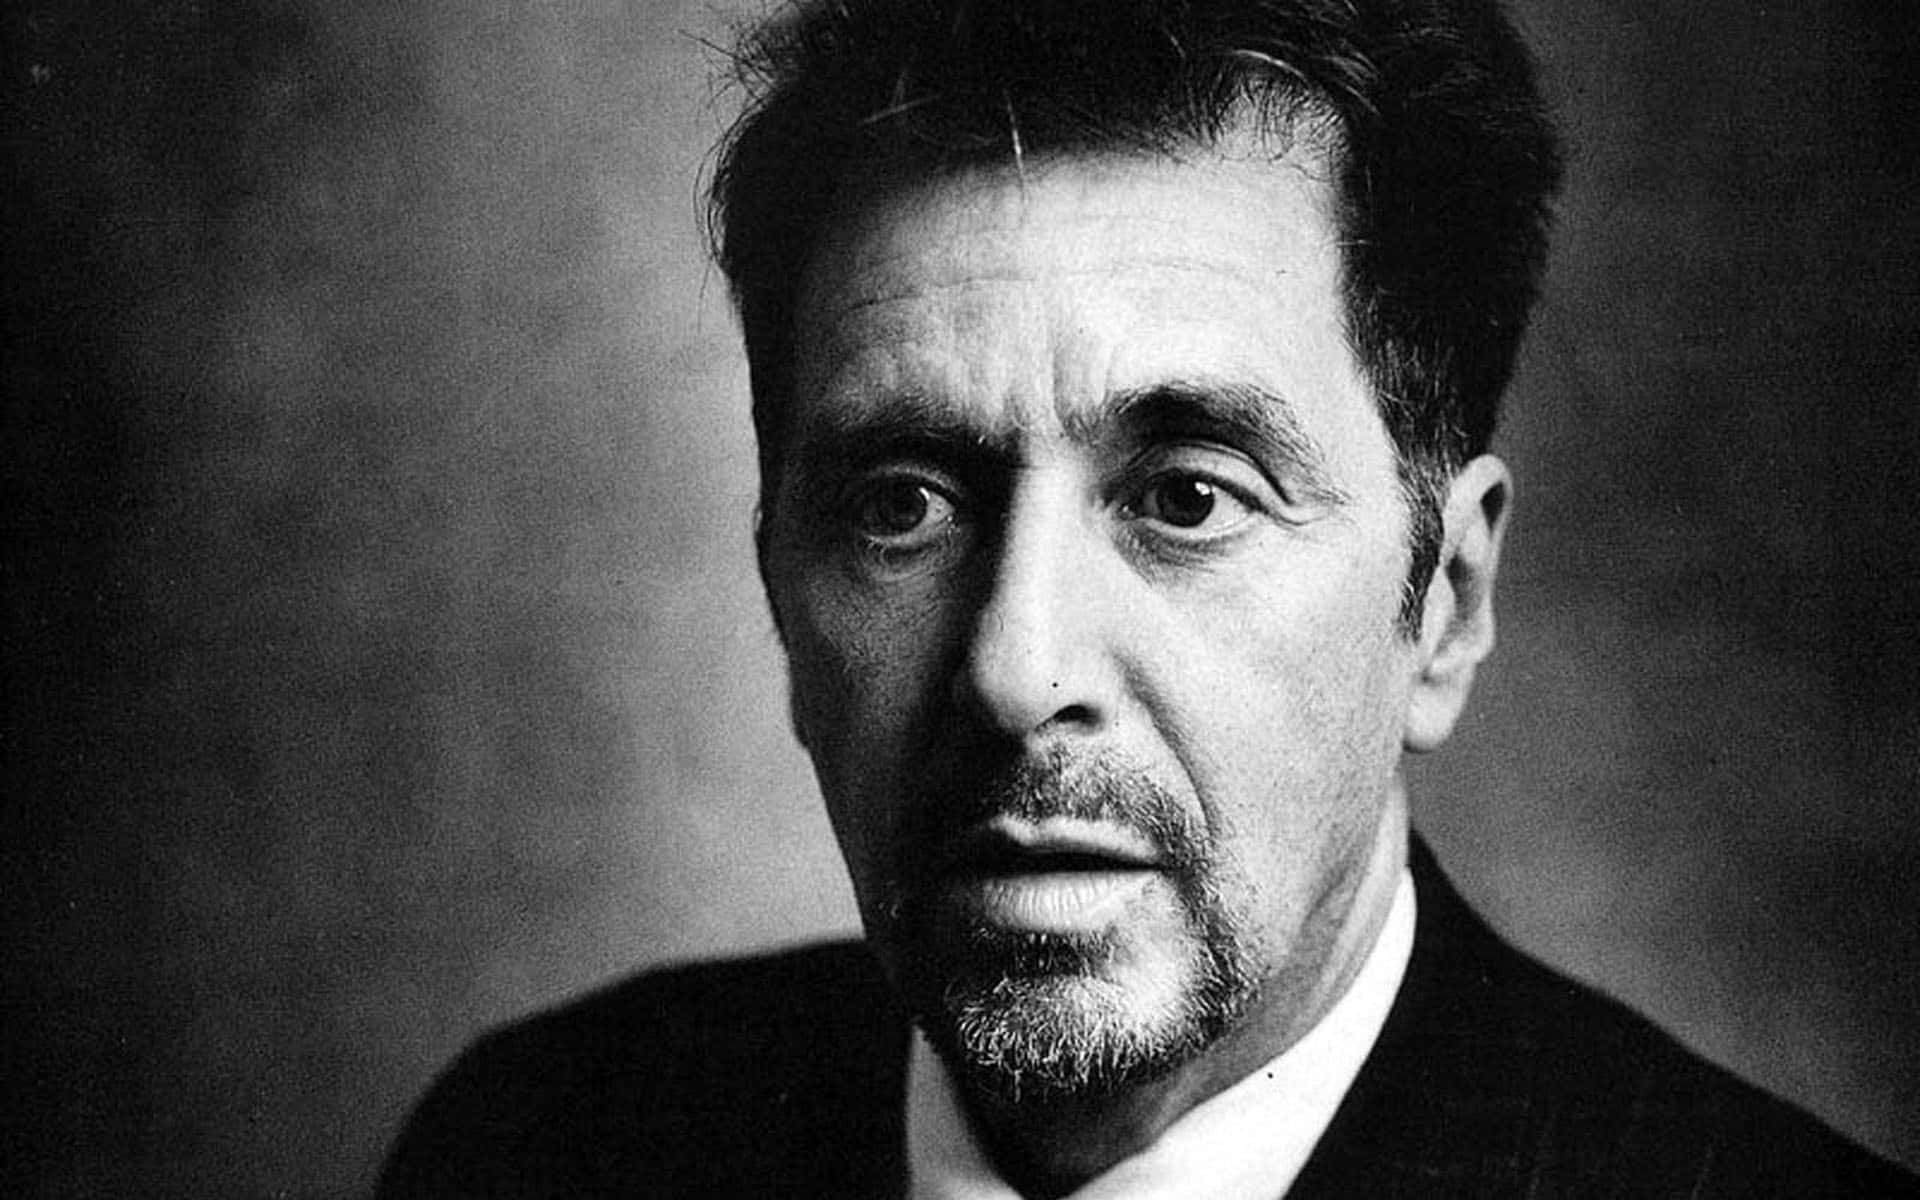 Al Pacino brings intensity to the role of Michael Corleone